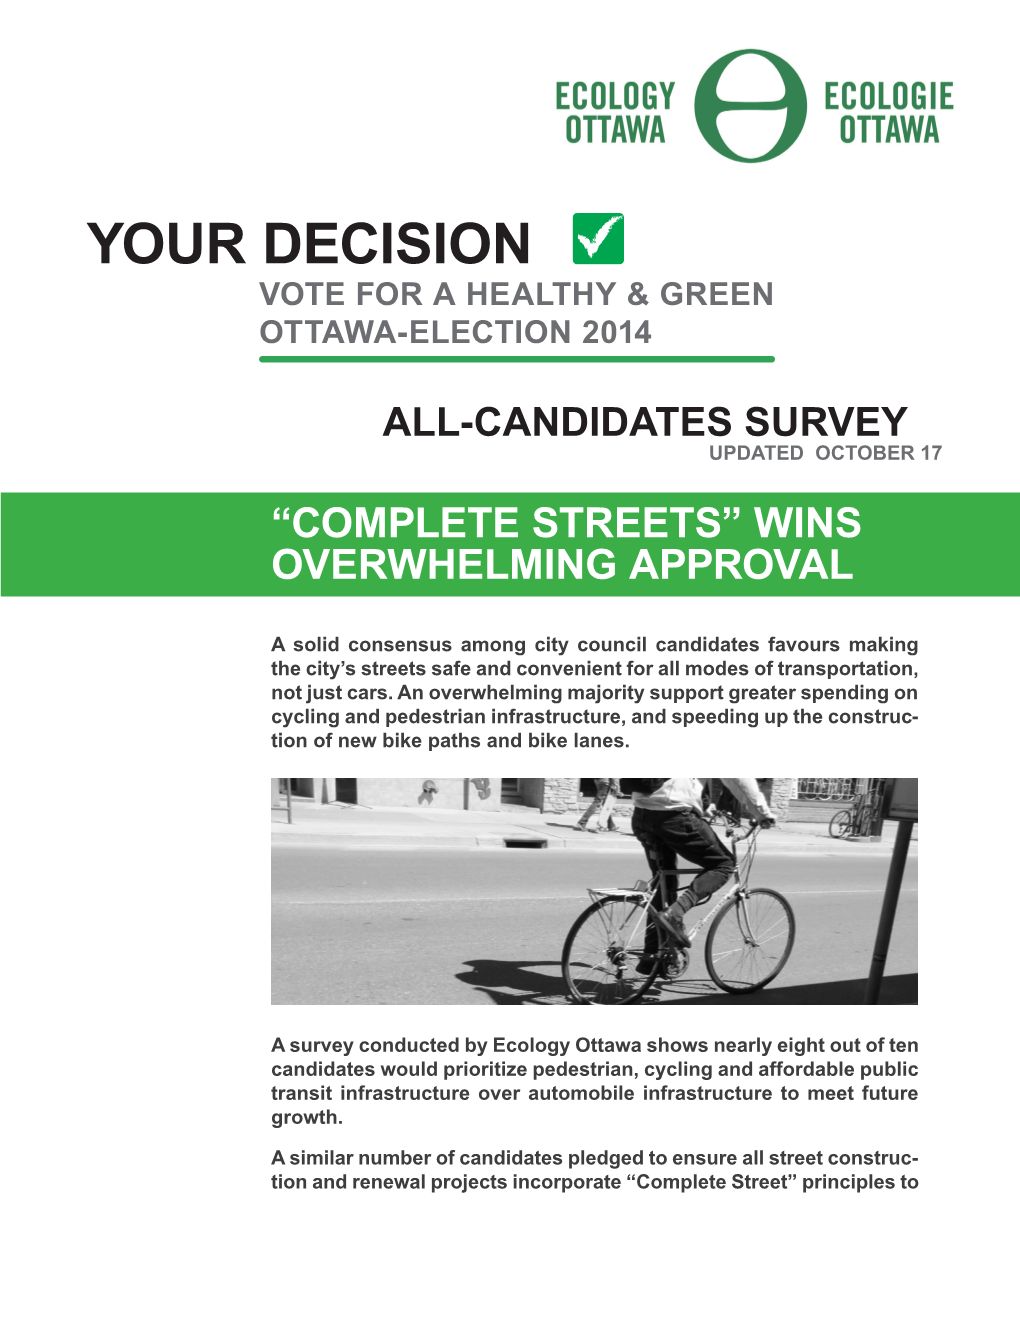 Complete Streets” Wins Overwhelming Approval